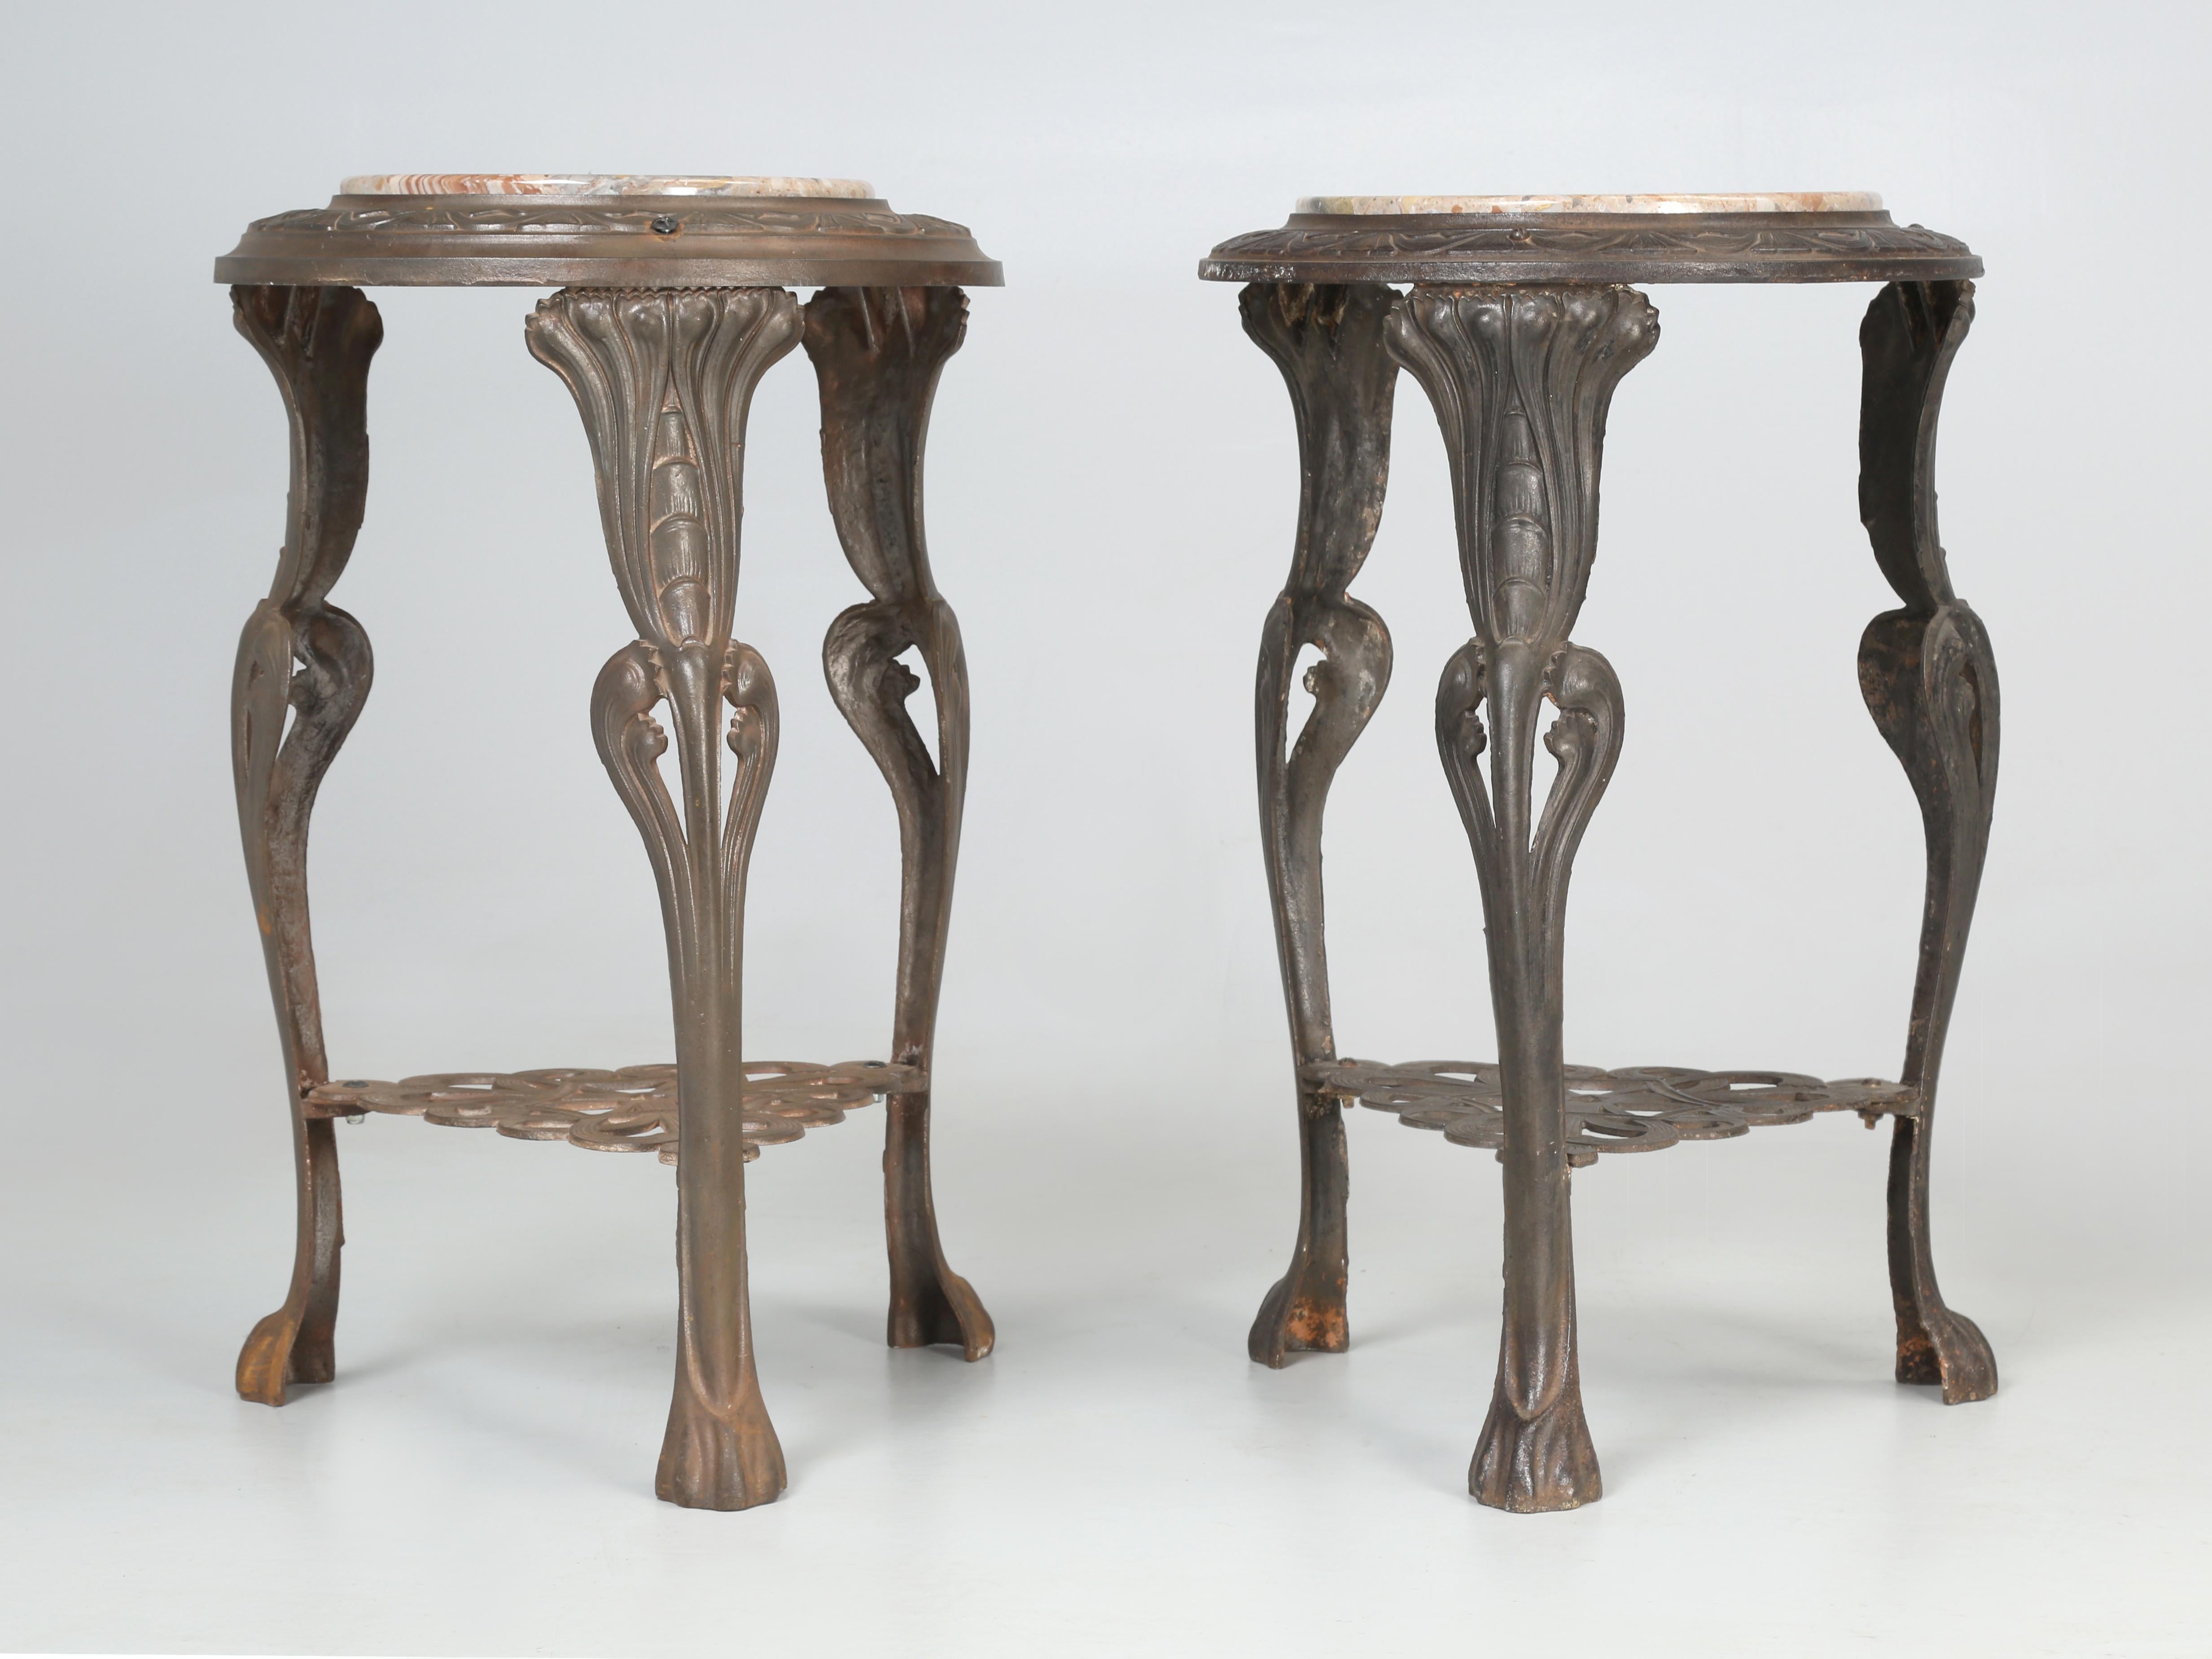 Near Pair of French Art Nouveau Guéridon Cast Iron Tables with Stone Tops For Sale 2